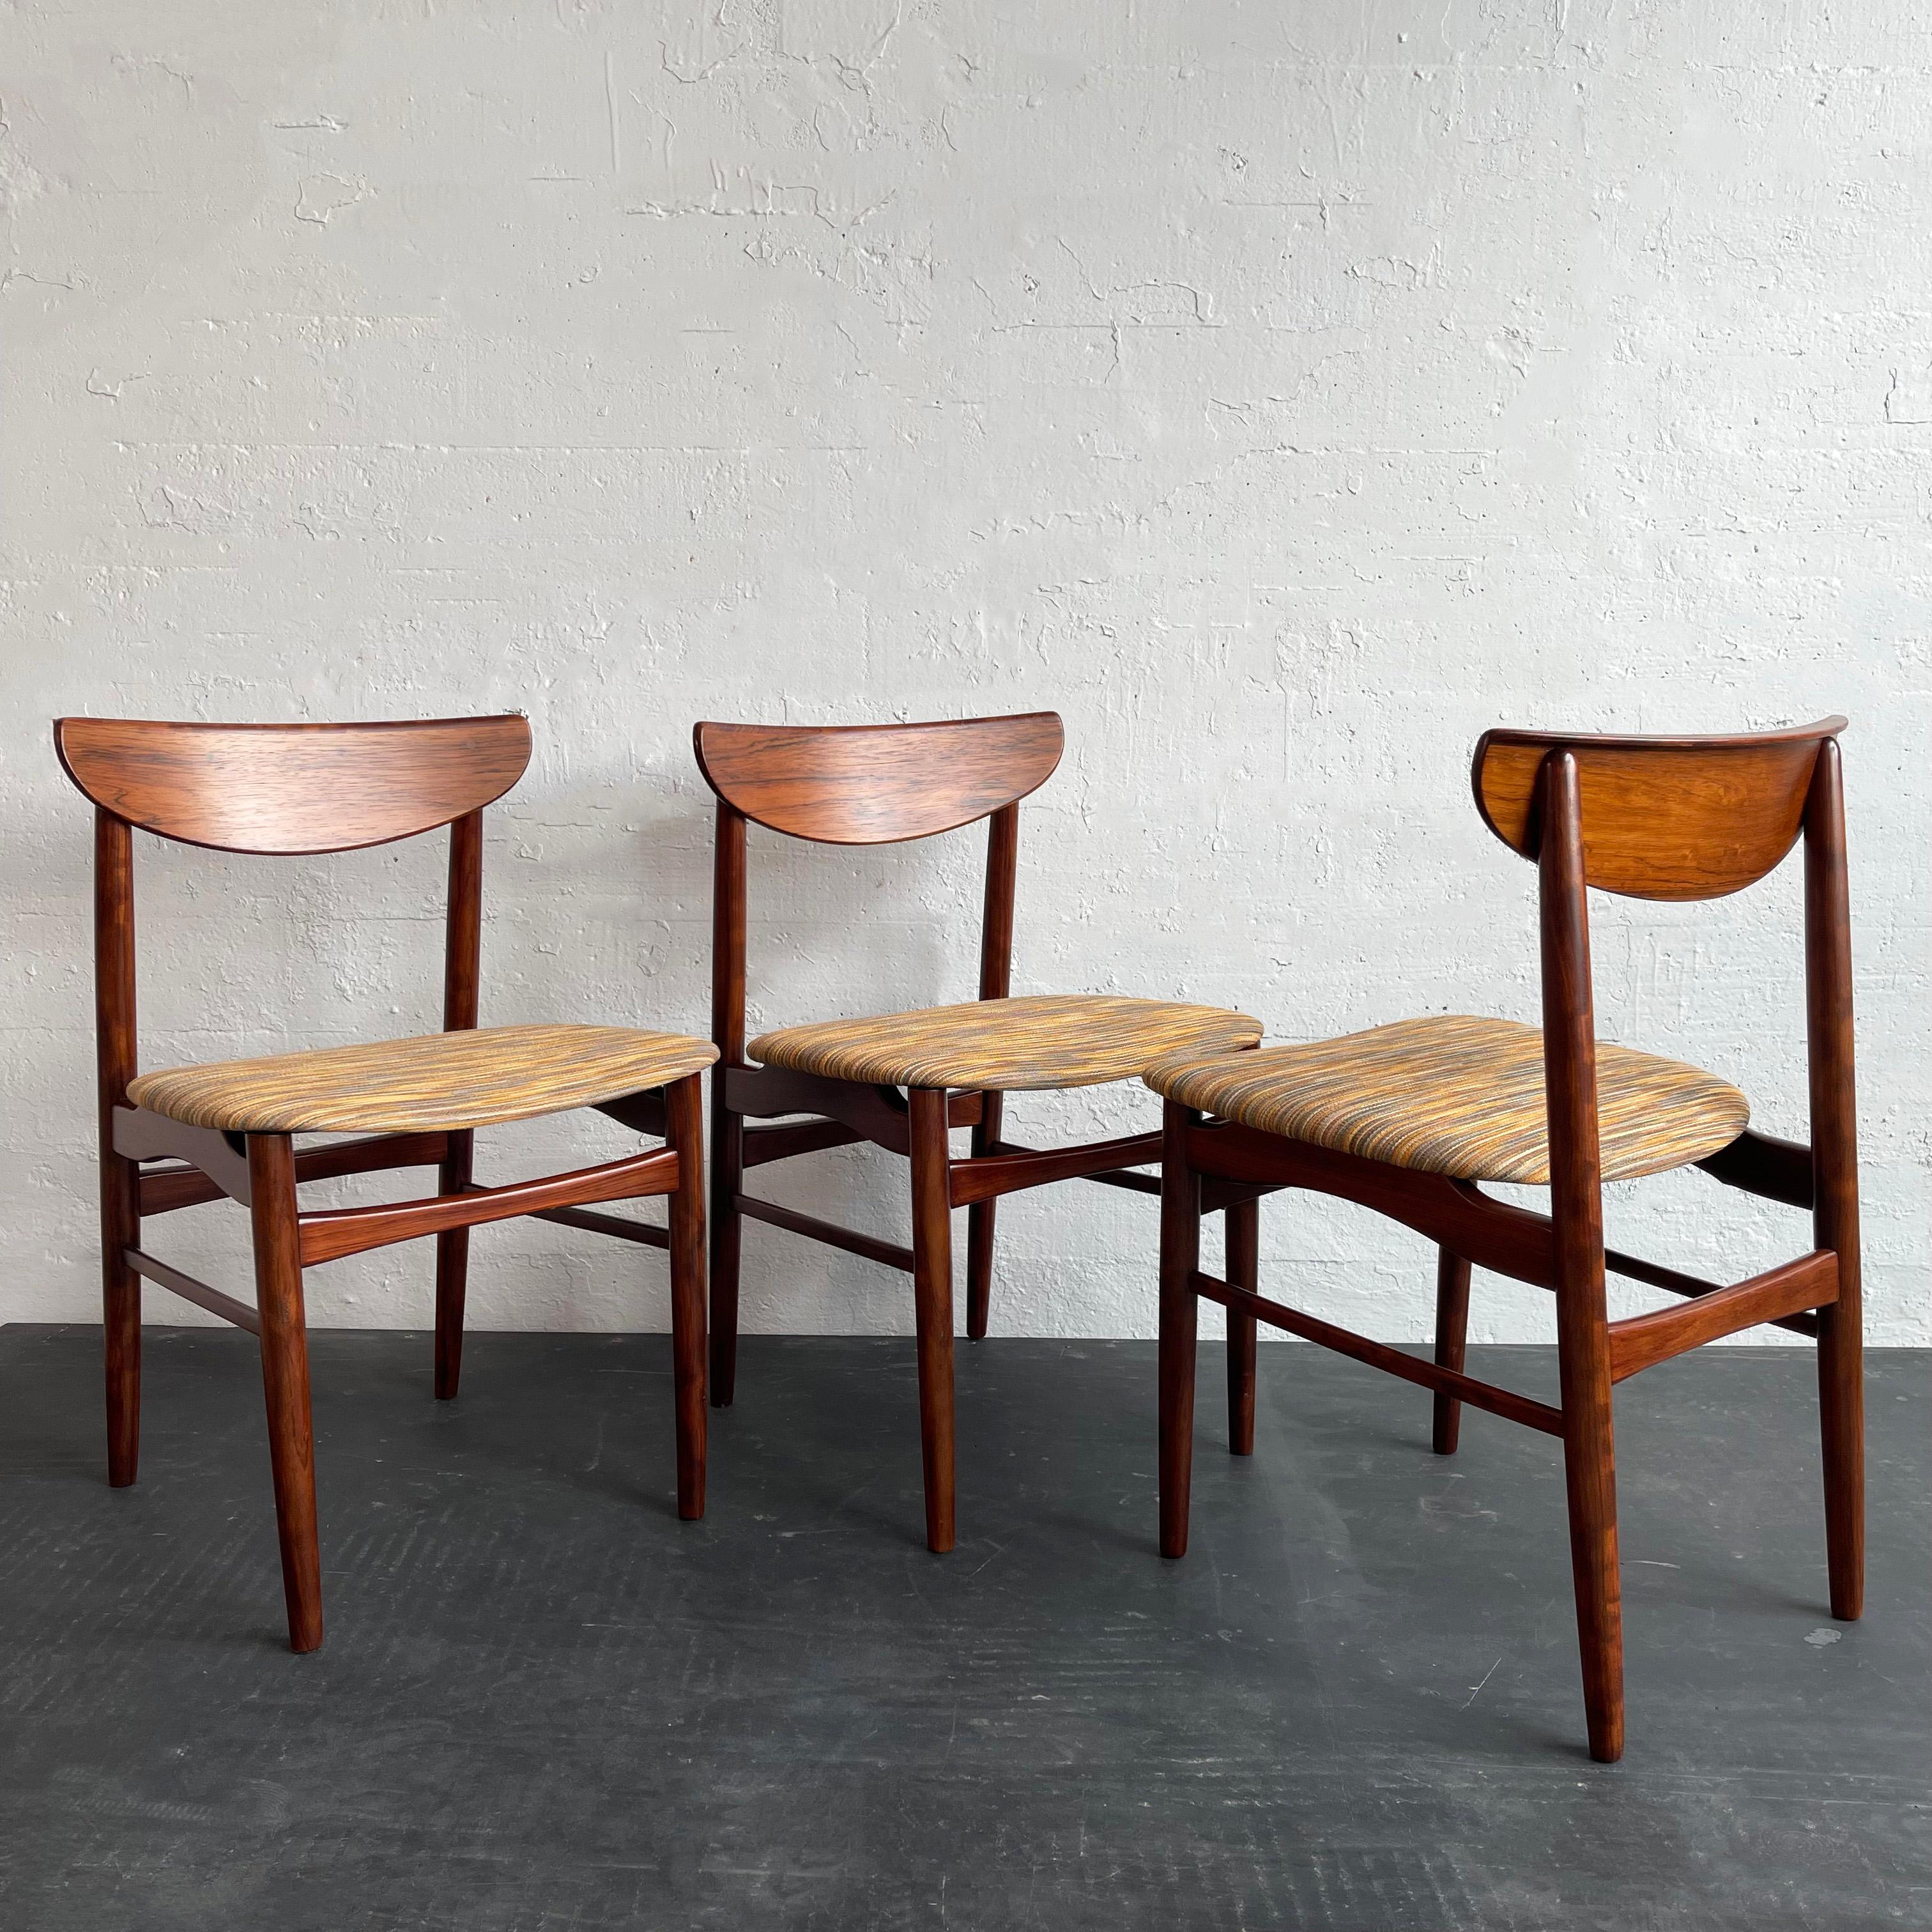 20th Century Danish Modern Rosewood Dining Chairs By Kurt Østervig For K.P. Møbler For Sale